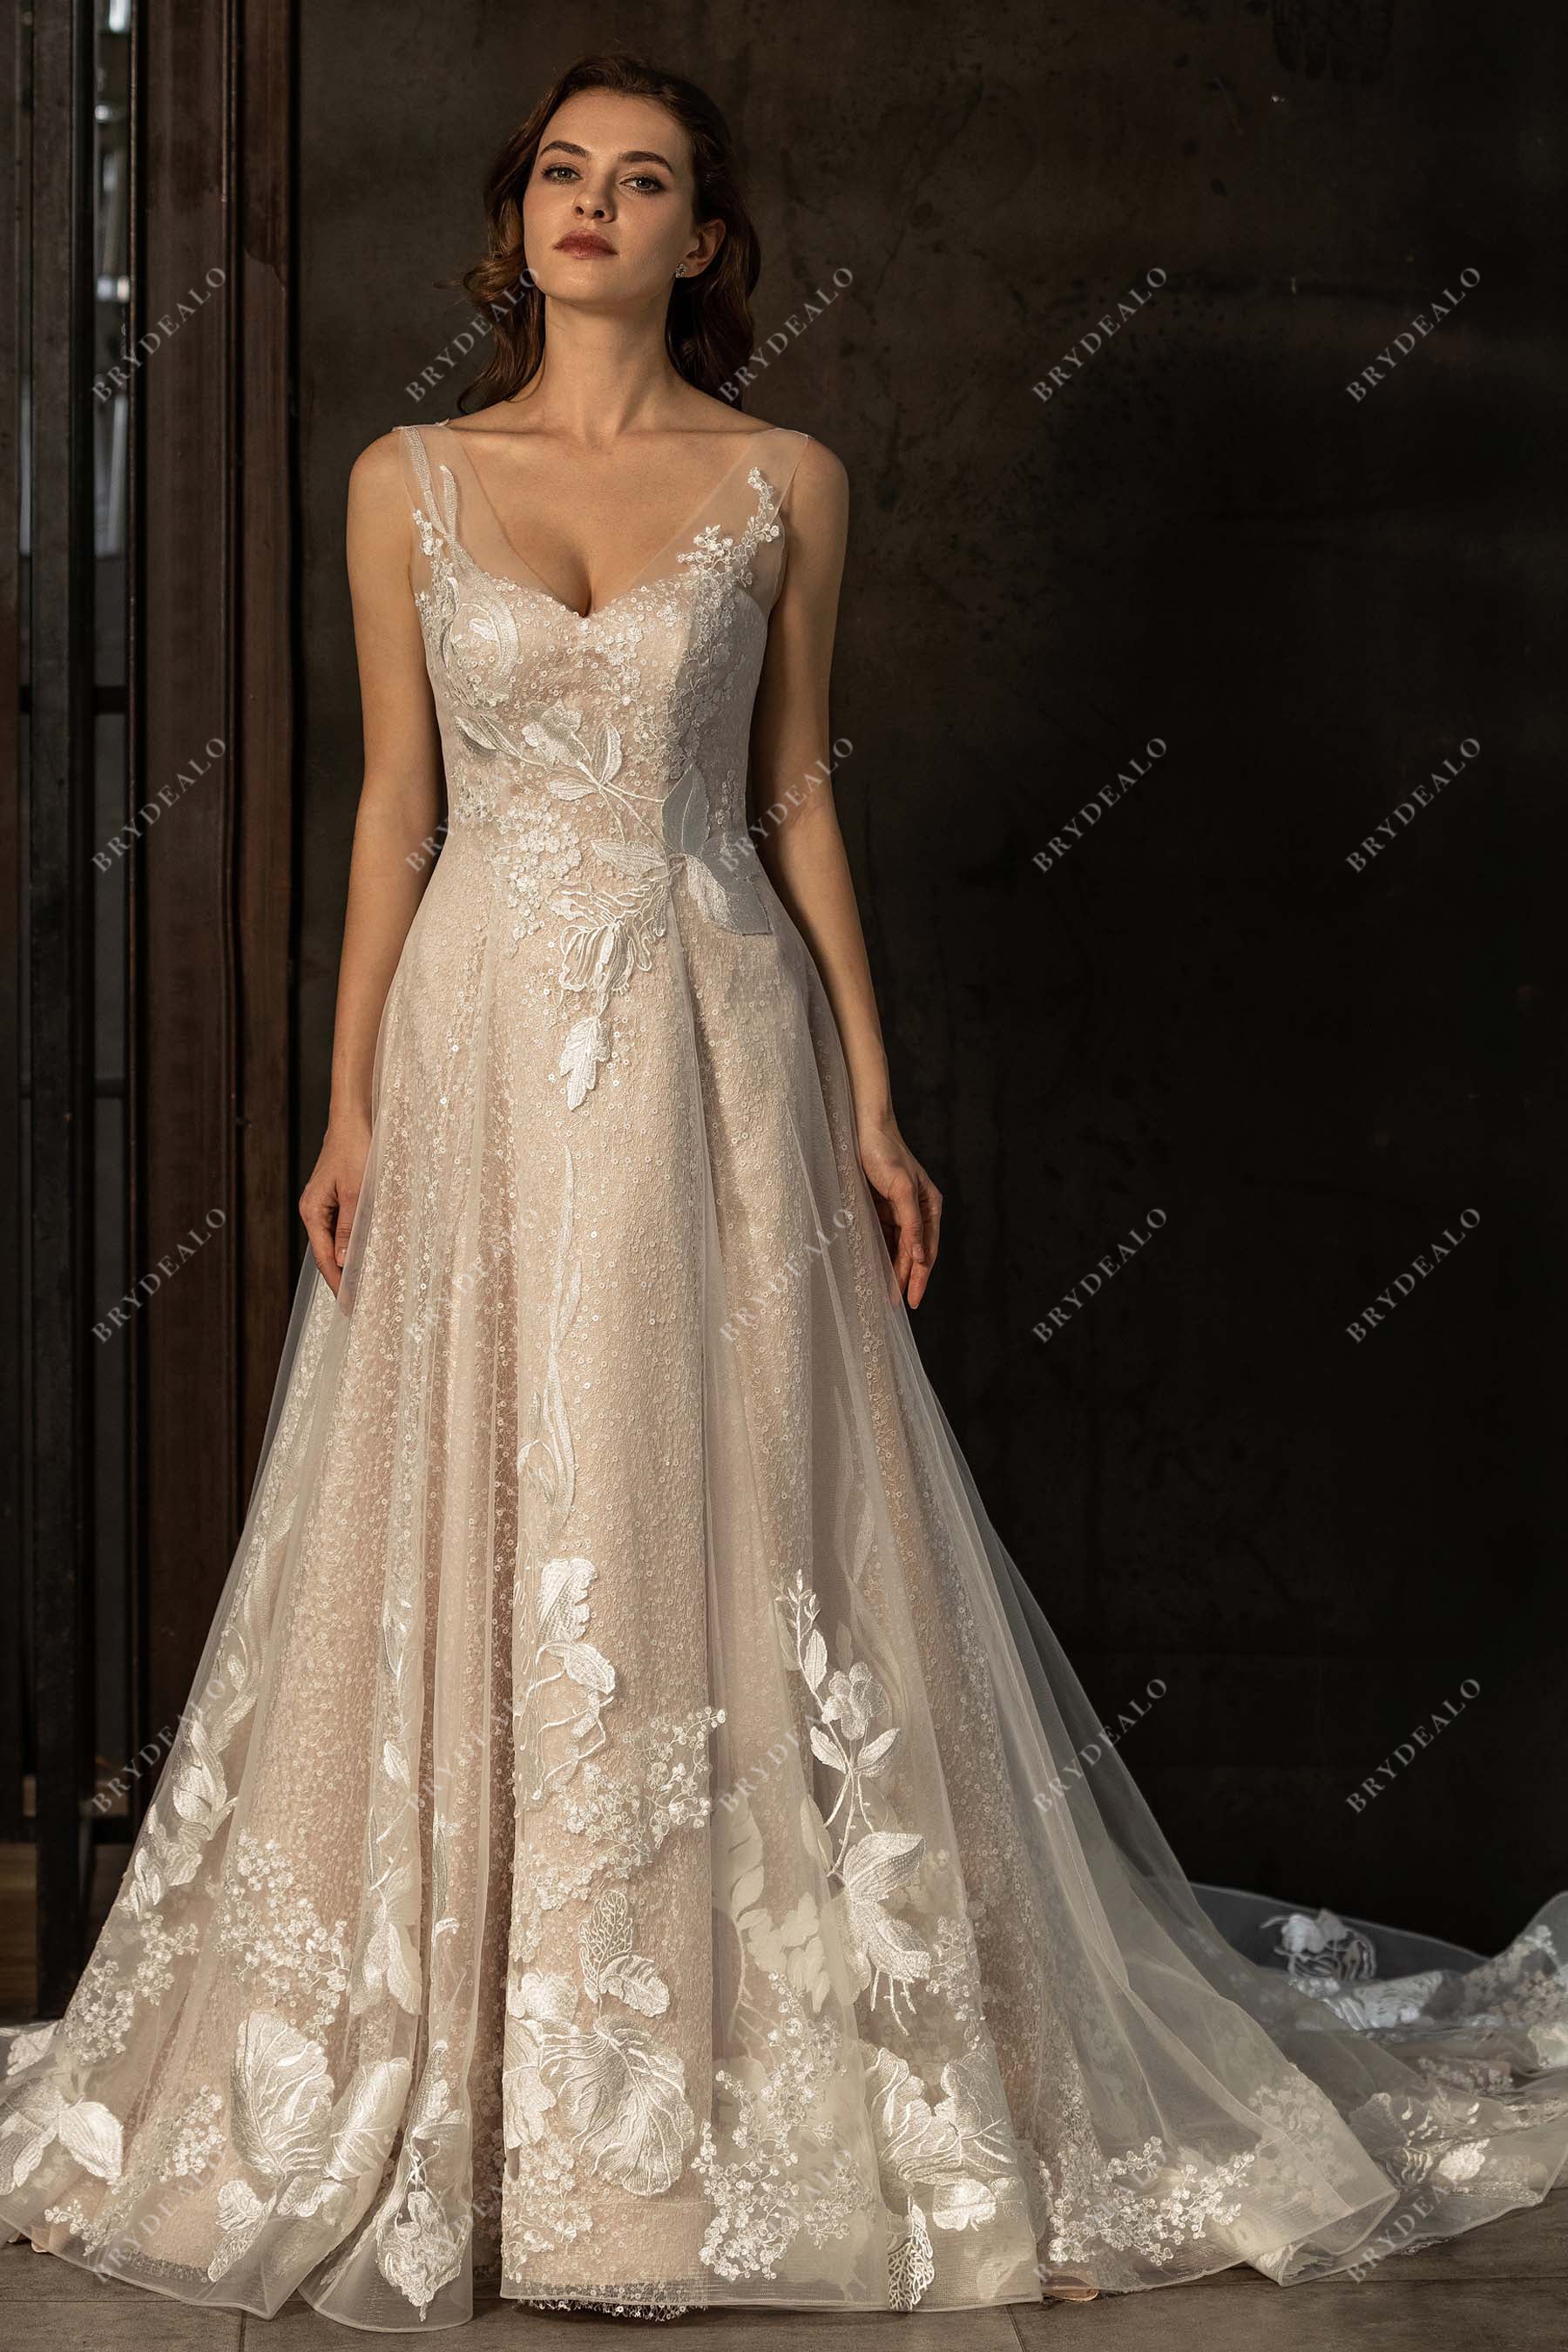 Designer Lace Strap Sweetheart Neck Bridal Gown